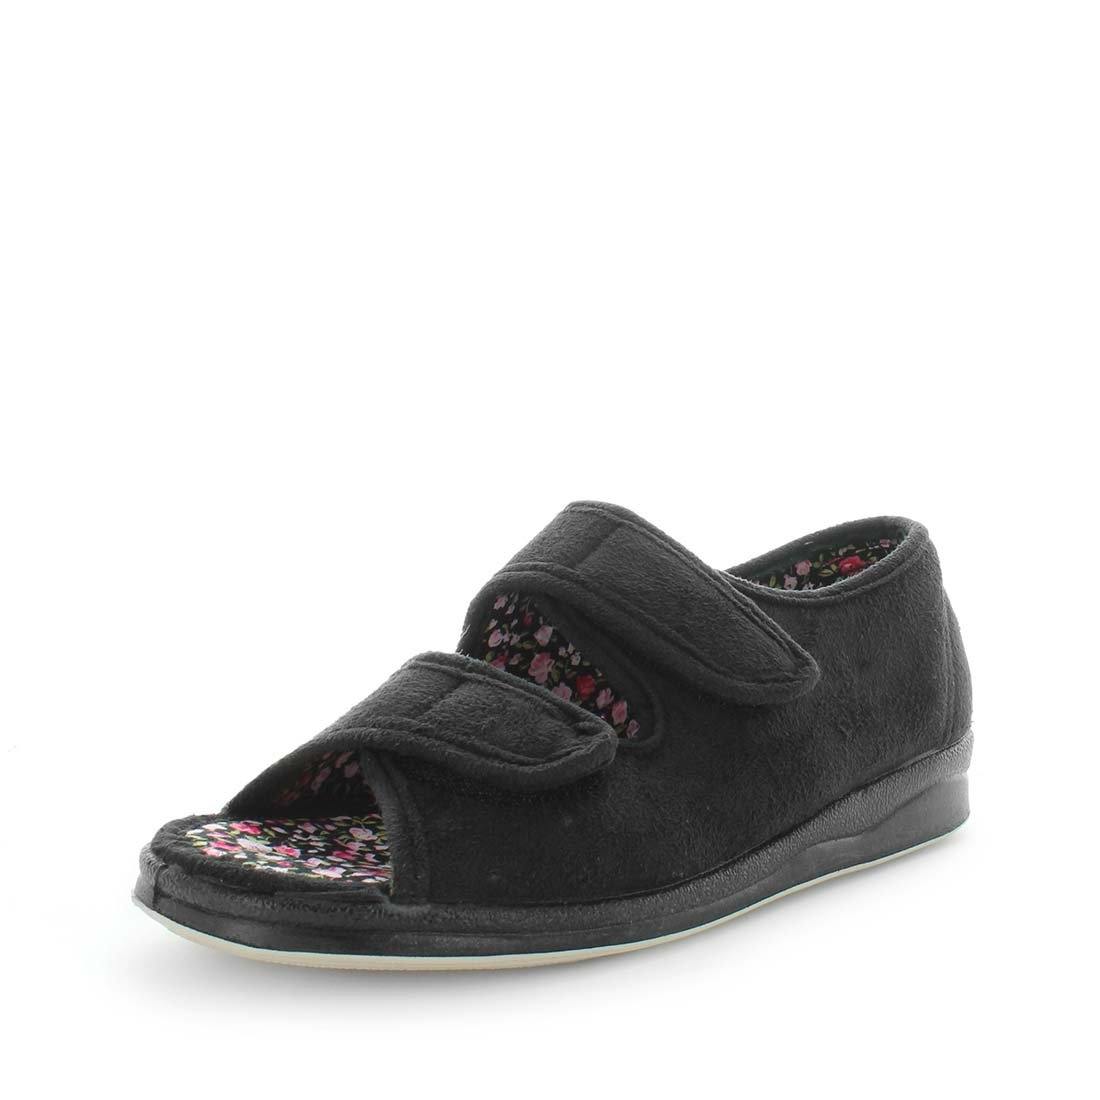 womens slippers - black entice slipper, by panda Slippers. A sandal slipper with a soft micro-fibre design, multiple velcro straps and a padded footbed for an extra comfy fit